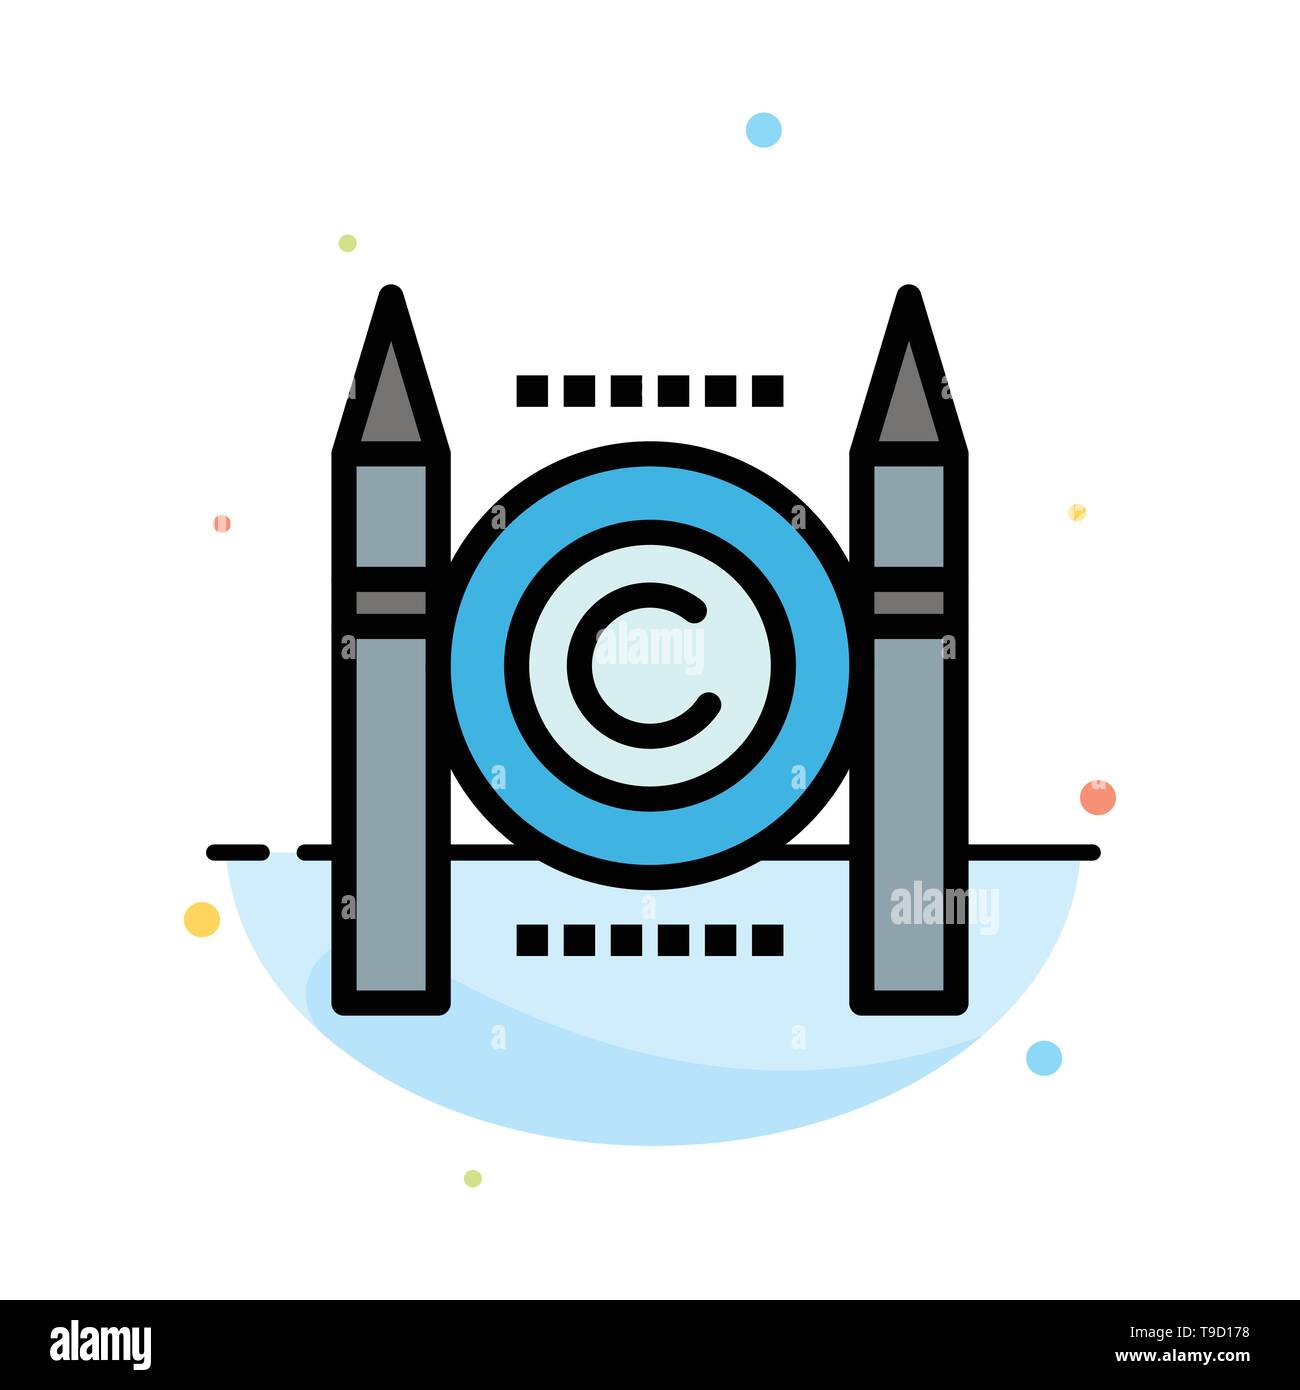 Business, Conflict, Copyright, Digital Abstract Flat Color Icon Template Stock Vector